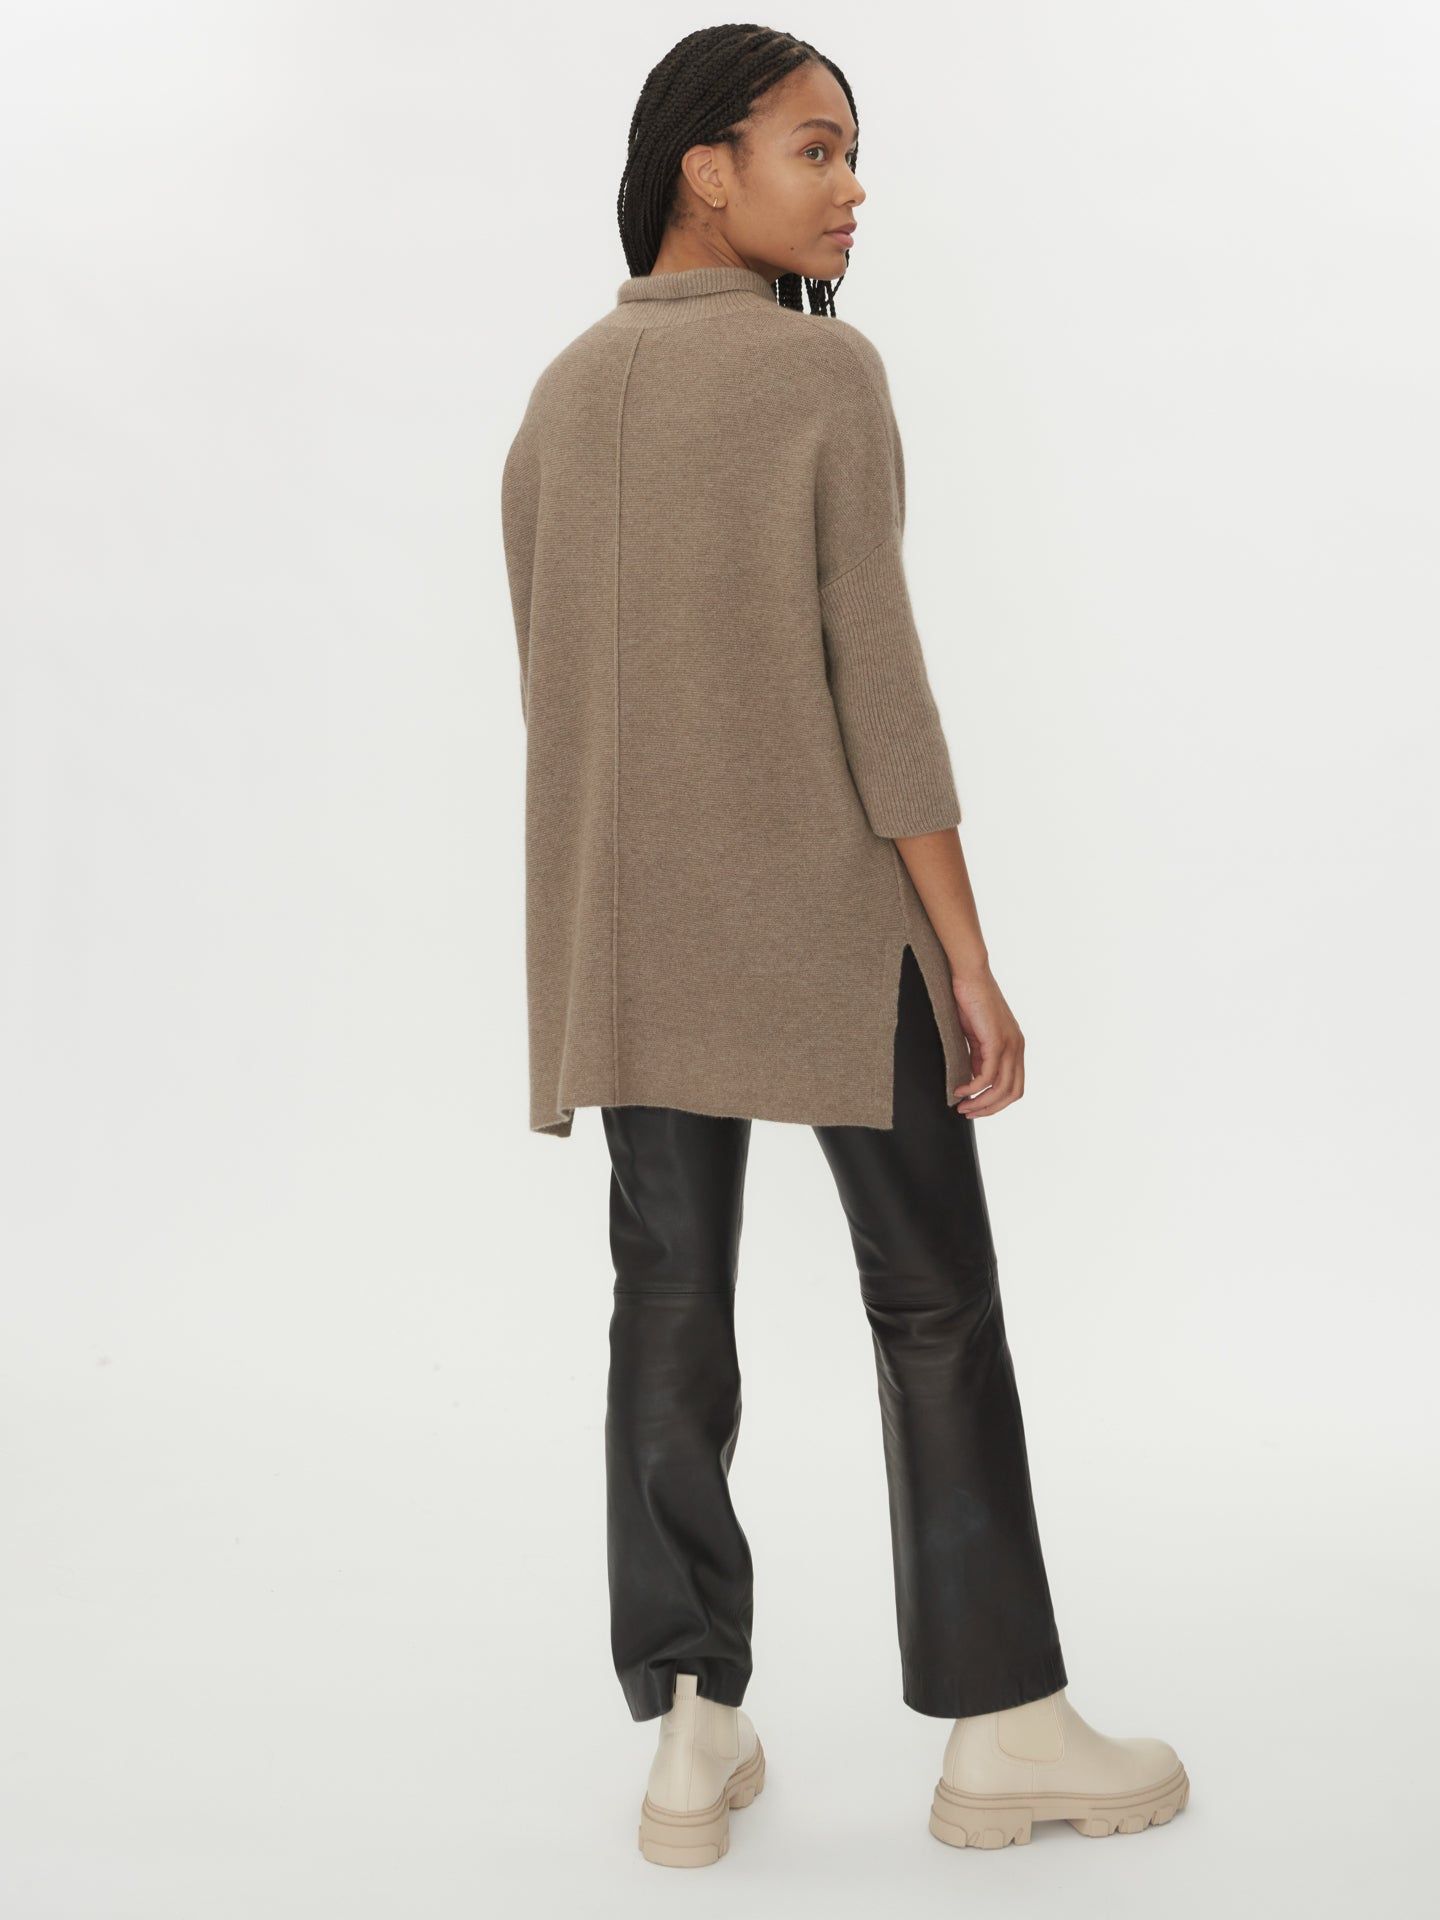 Women's Cashmere Long High Neck Sweater Taupe - Gobi Cashmere